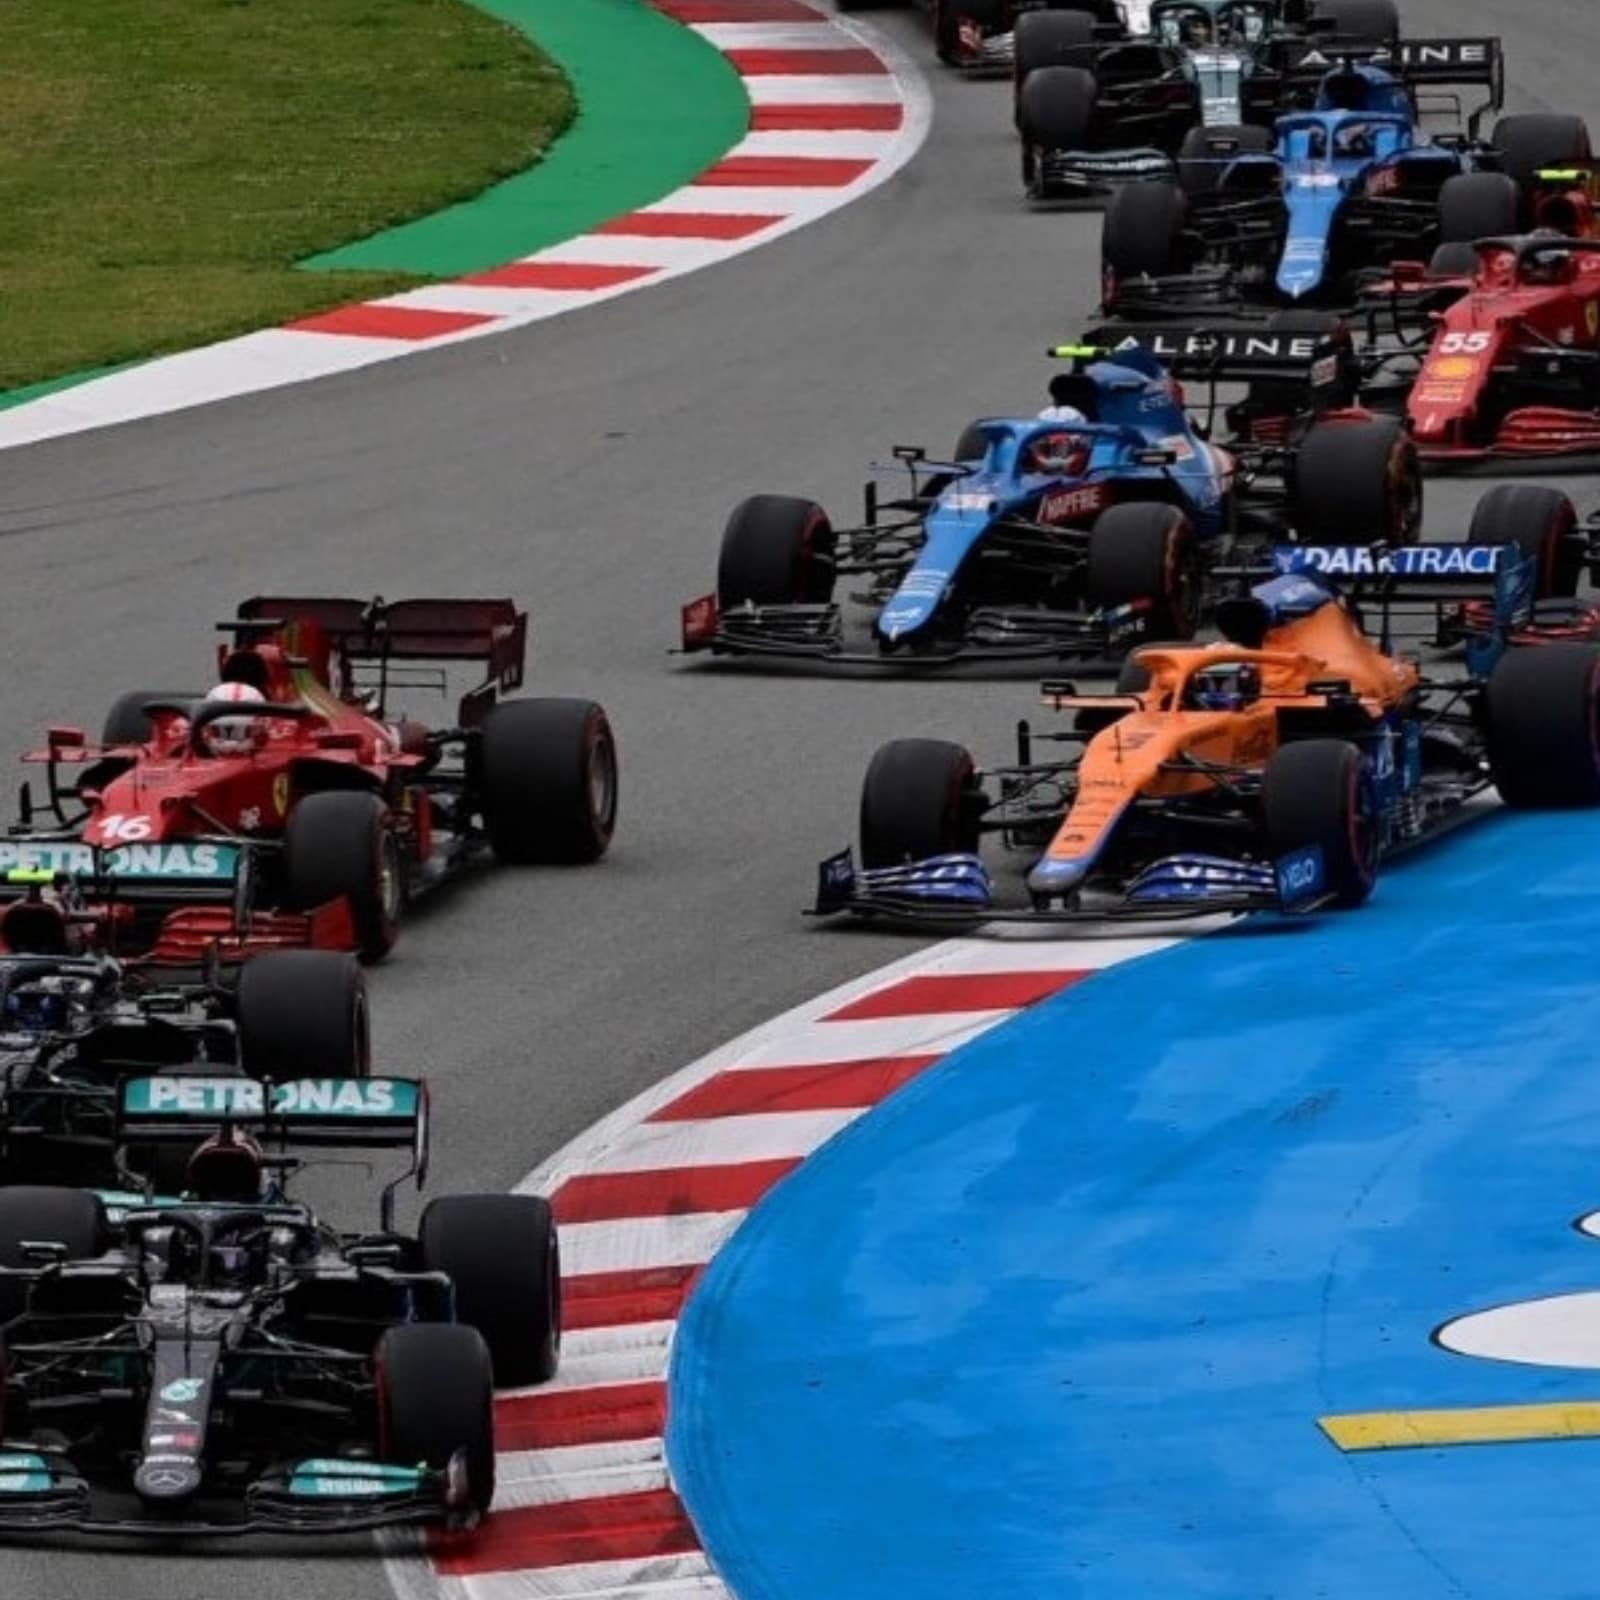 Miami GP Live Streaming When and Where to Watch Miami GP 2022 Live Coverage on Live TV Online